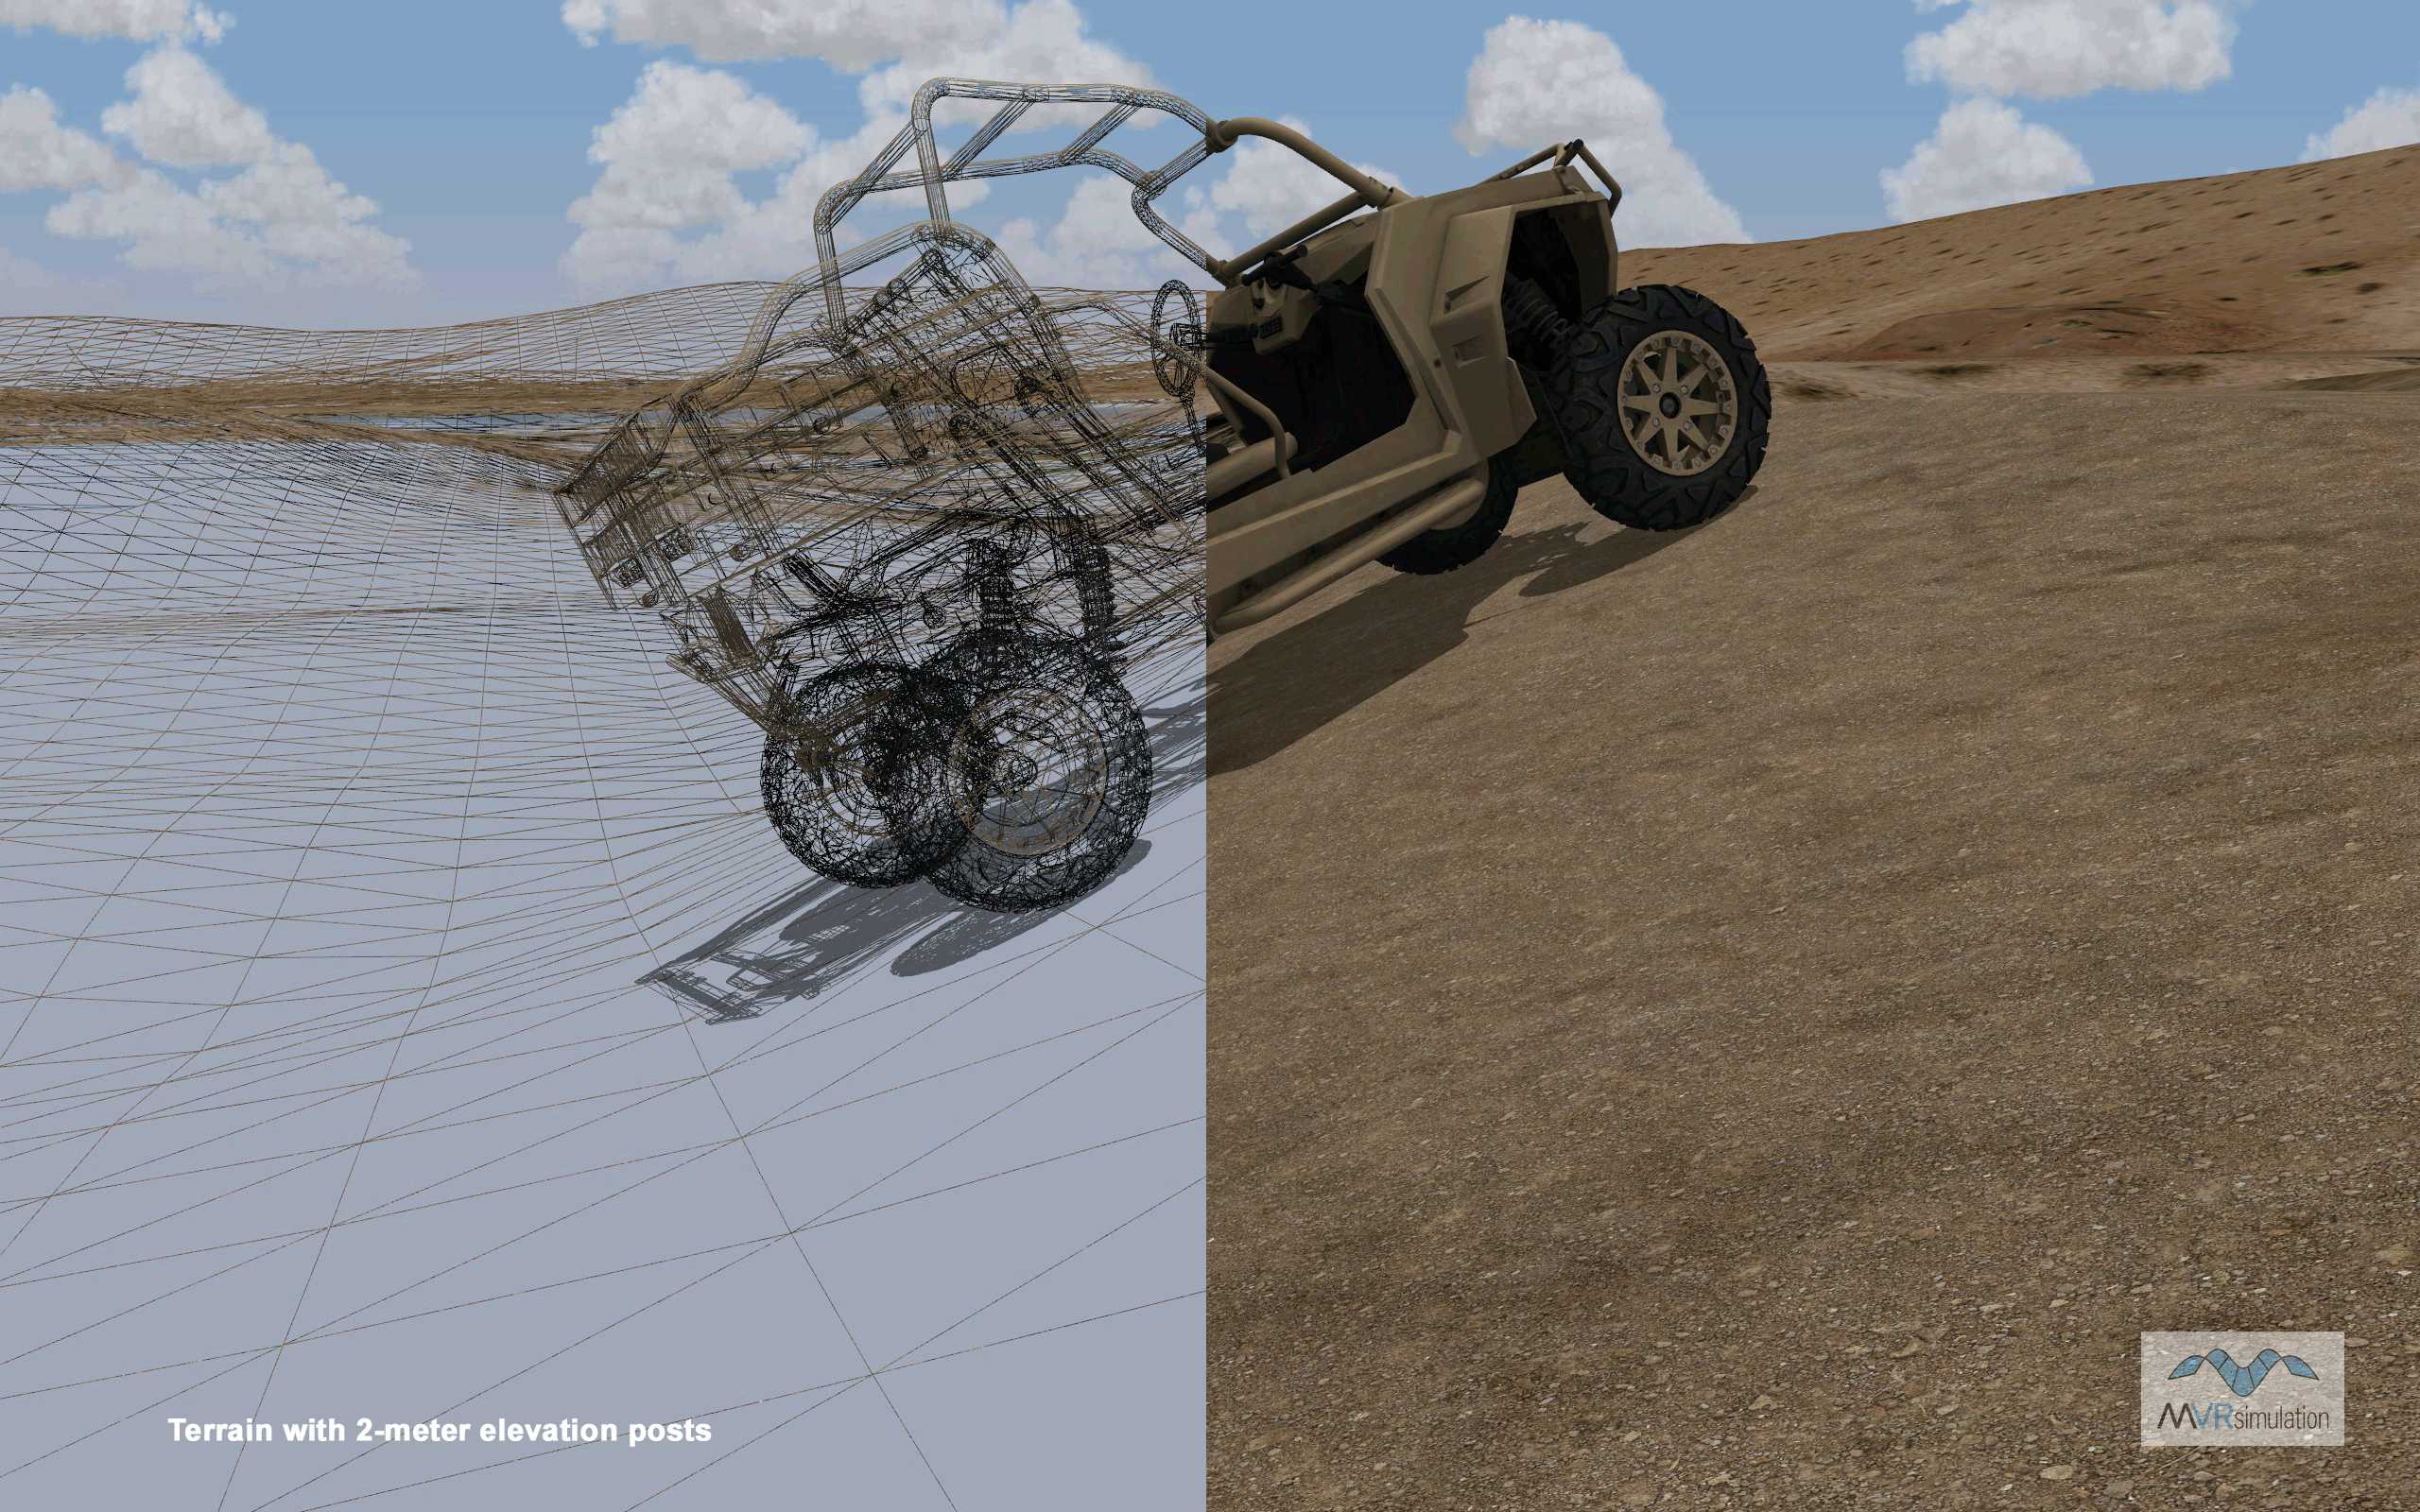 Cycling through the effect of the elevation data on terrain accuracy with MVRsimulation's model of the MRZR-2 vehicle.